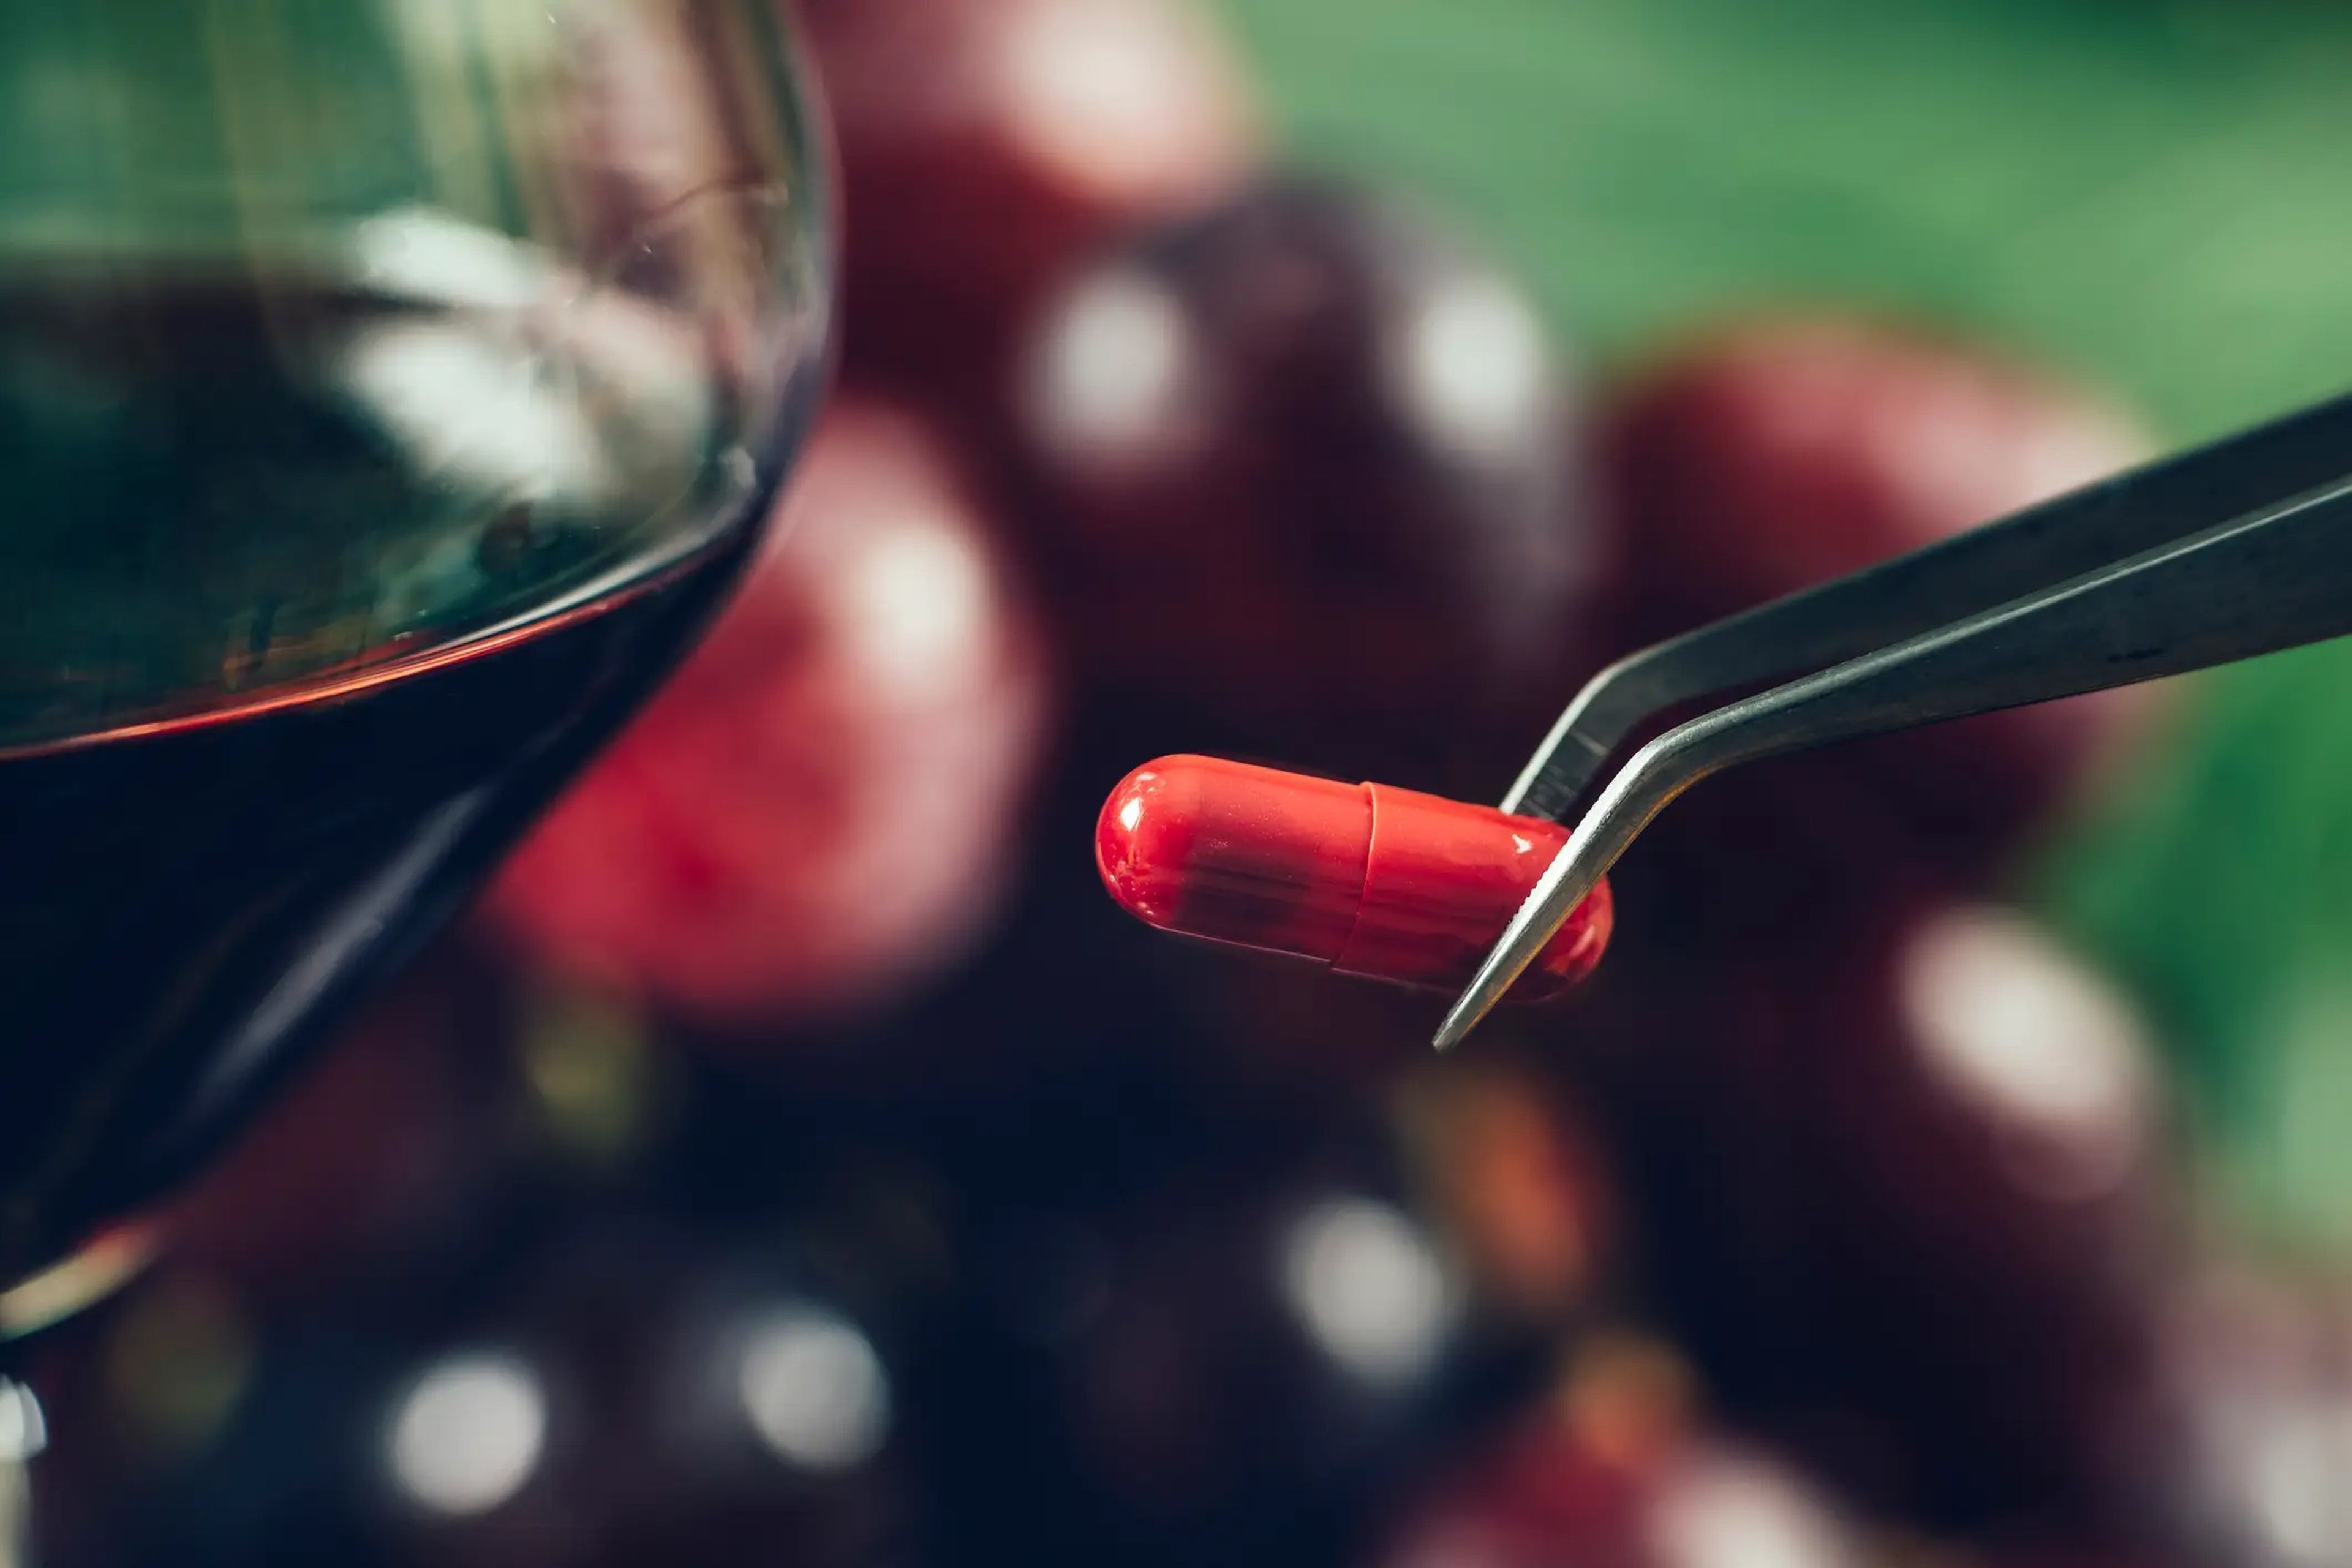 A red pill held with tweezers next to a glass of red wine.